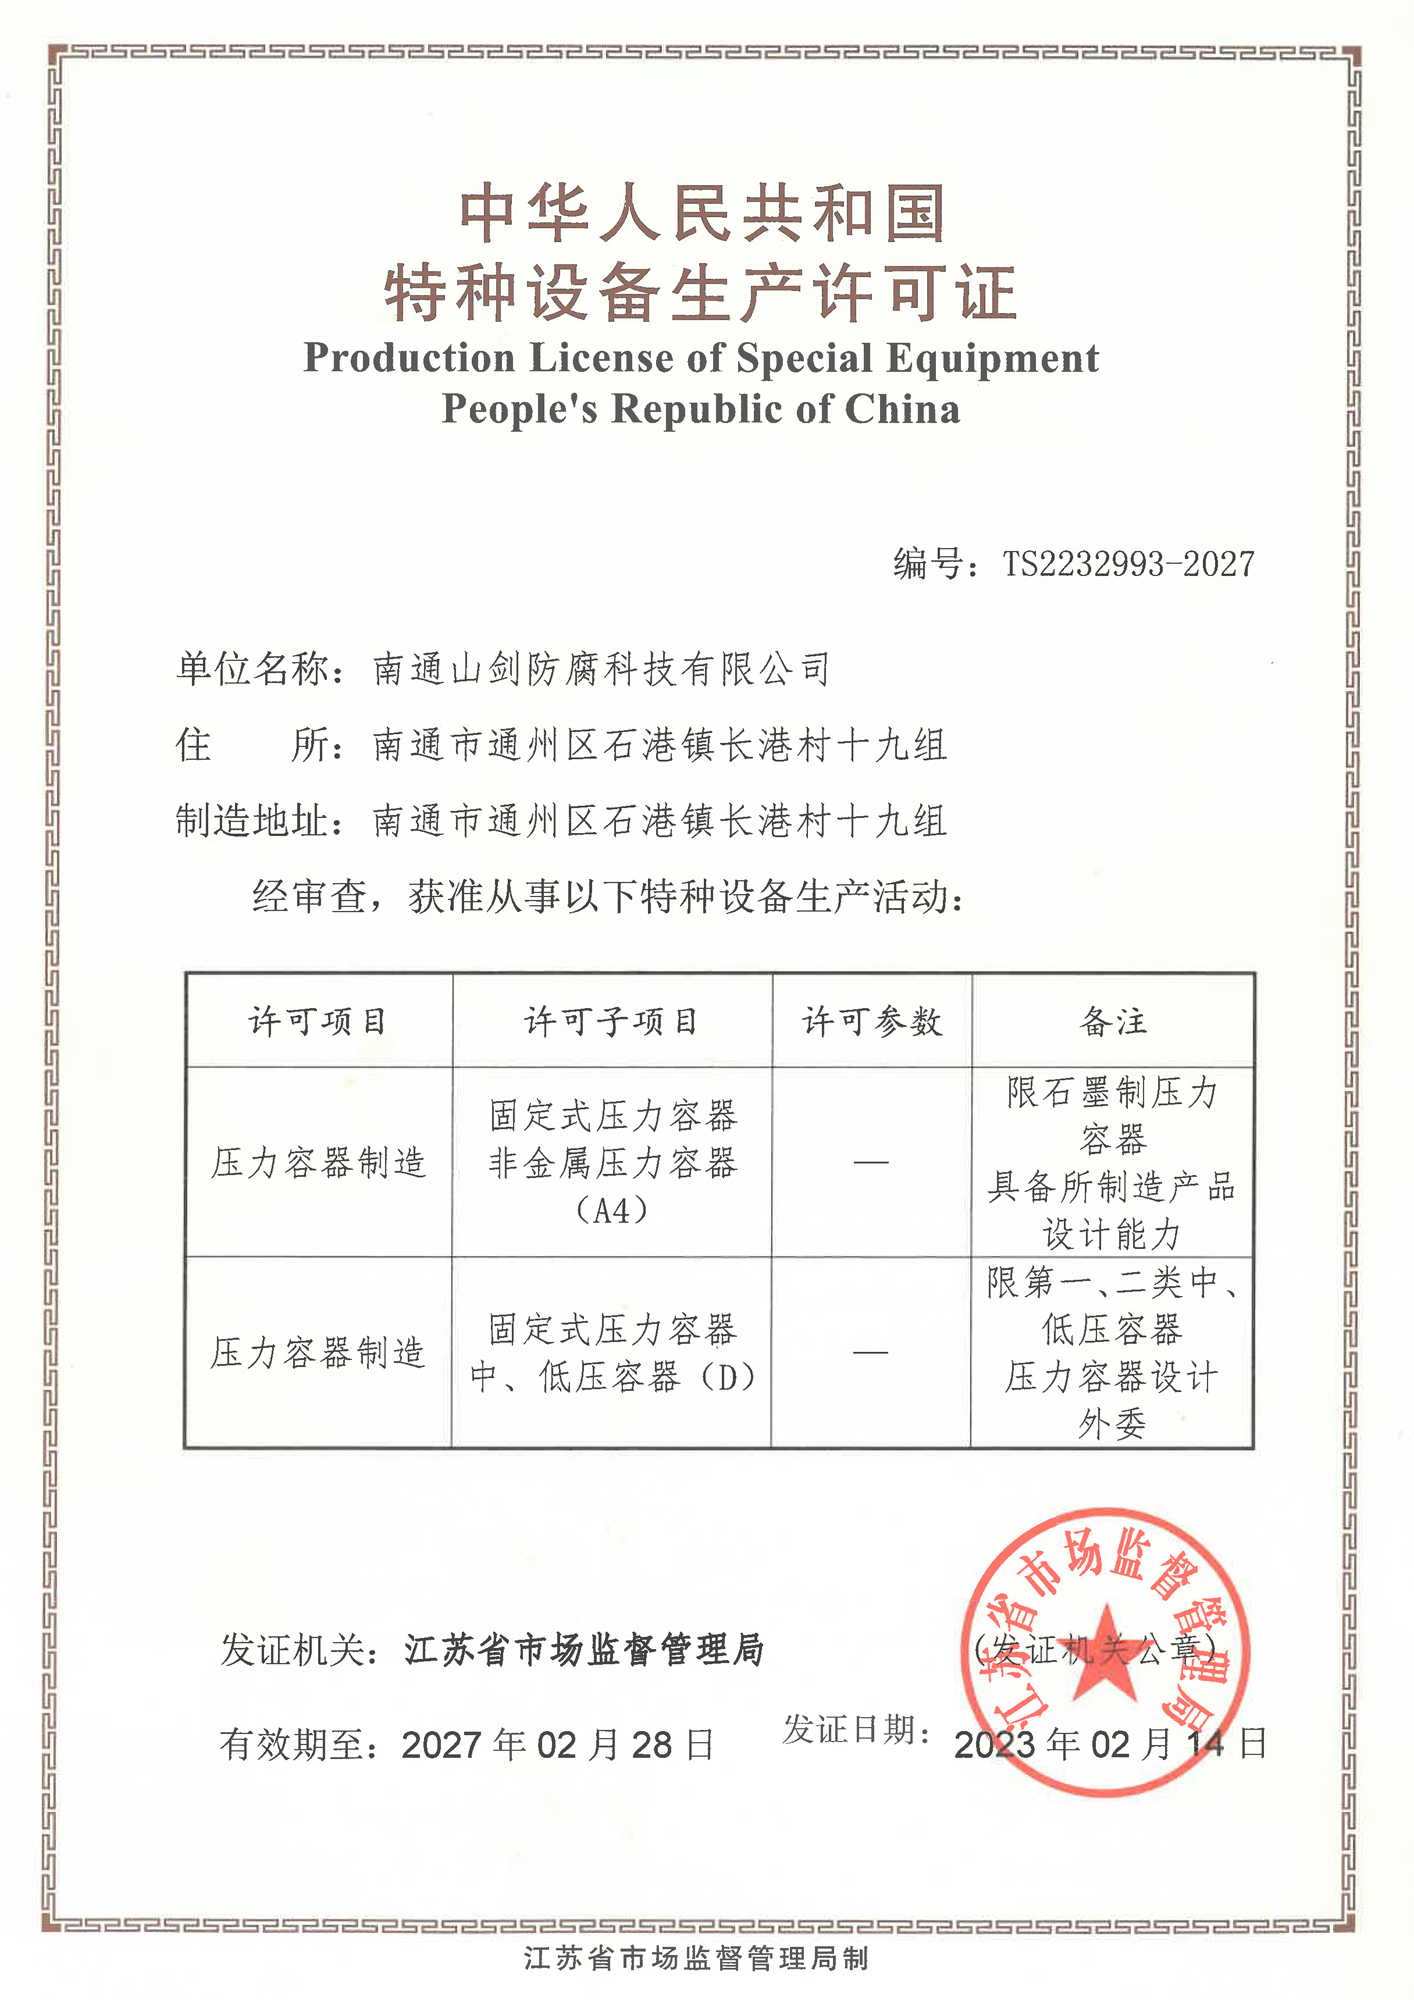 Special equipment manufacturing license of the People's Republic of China